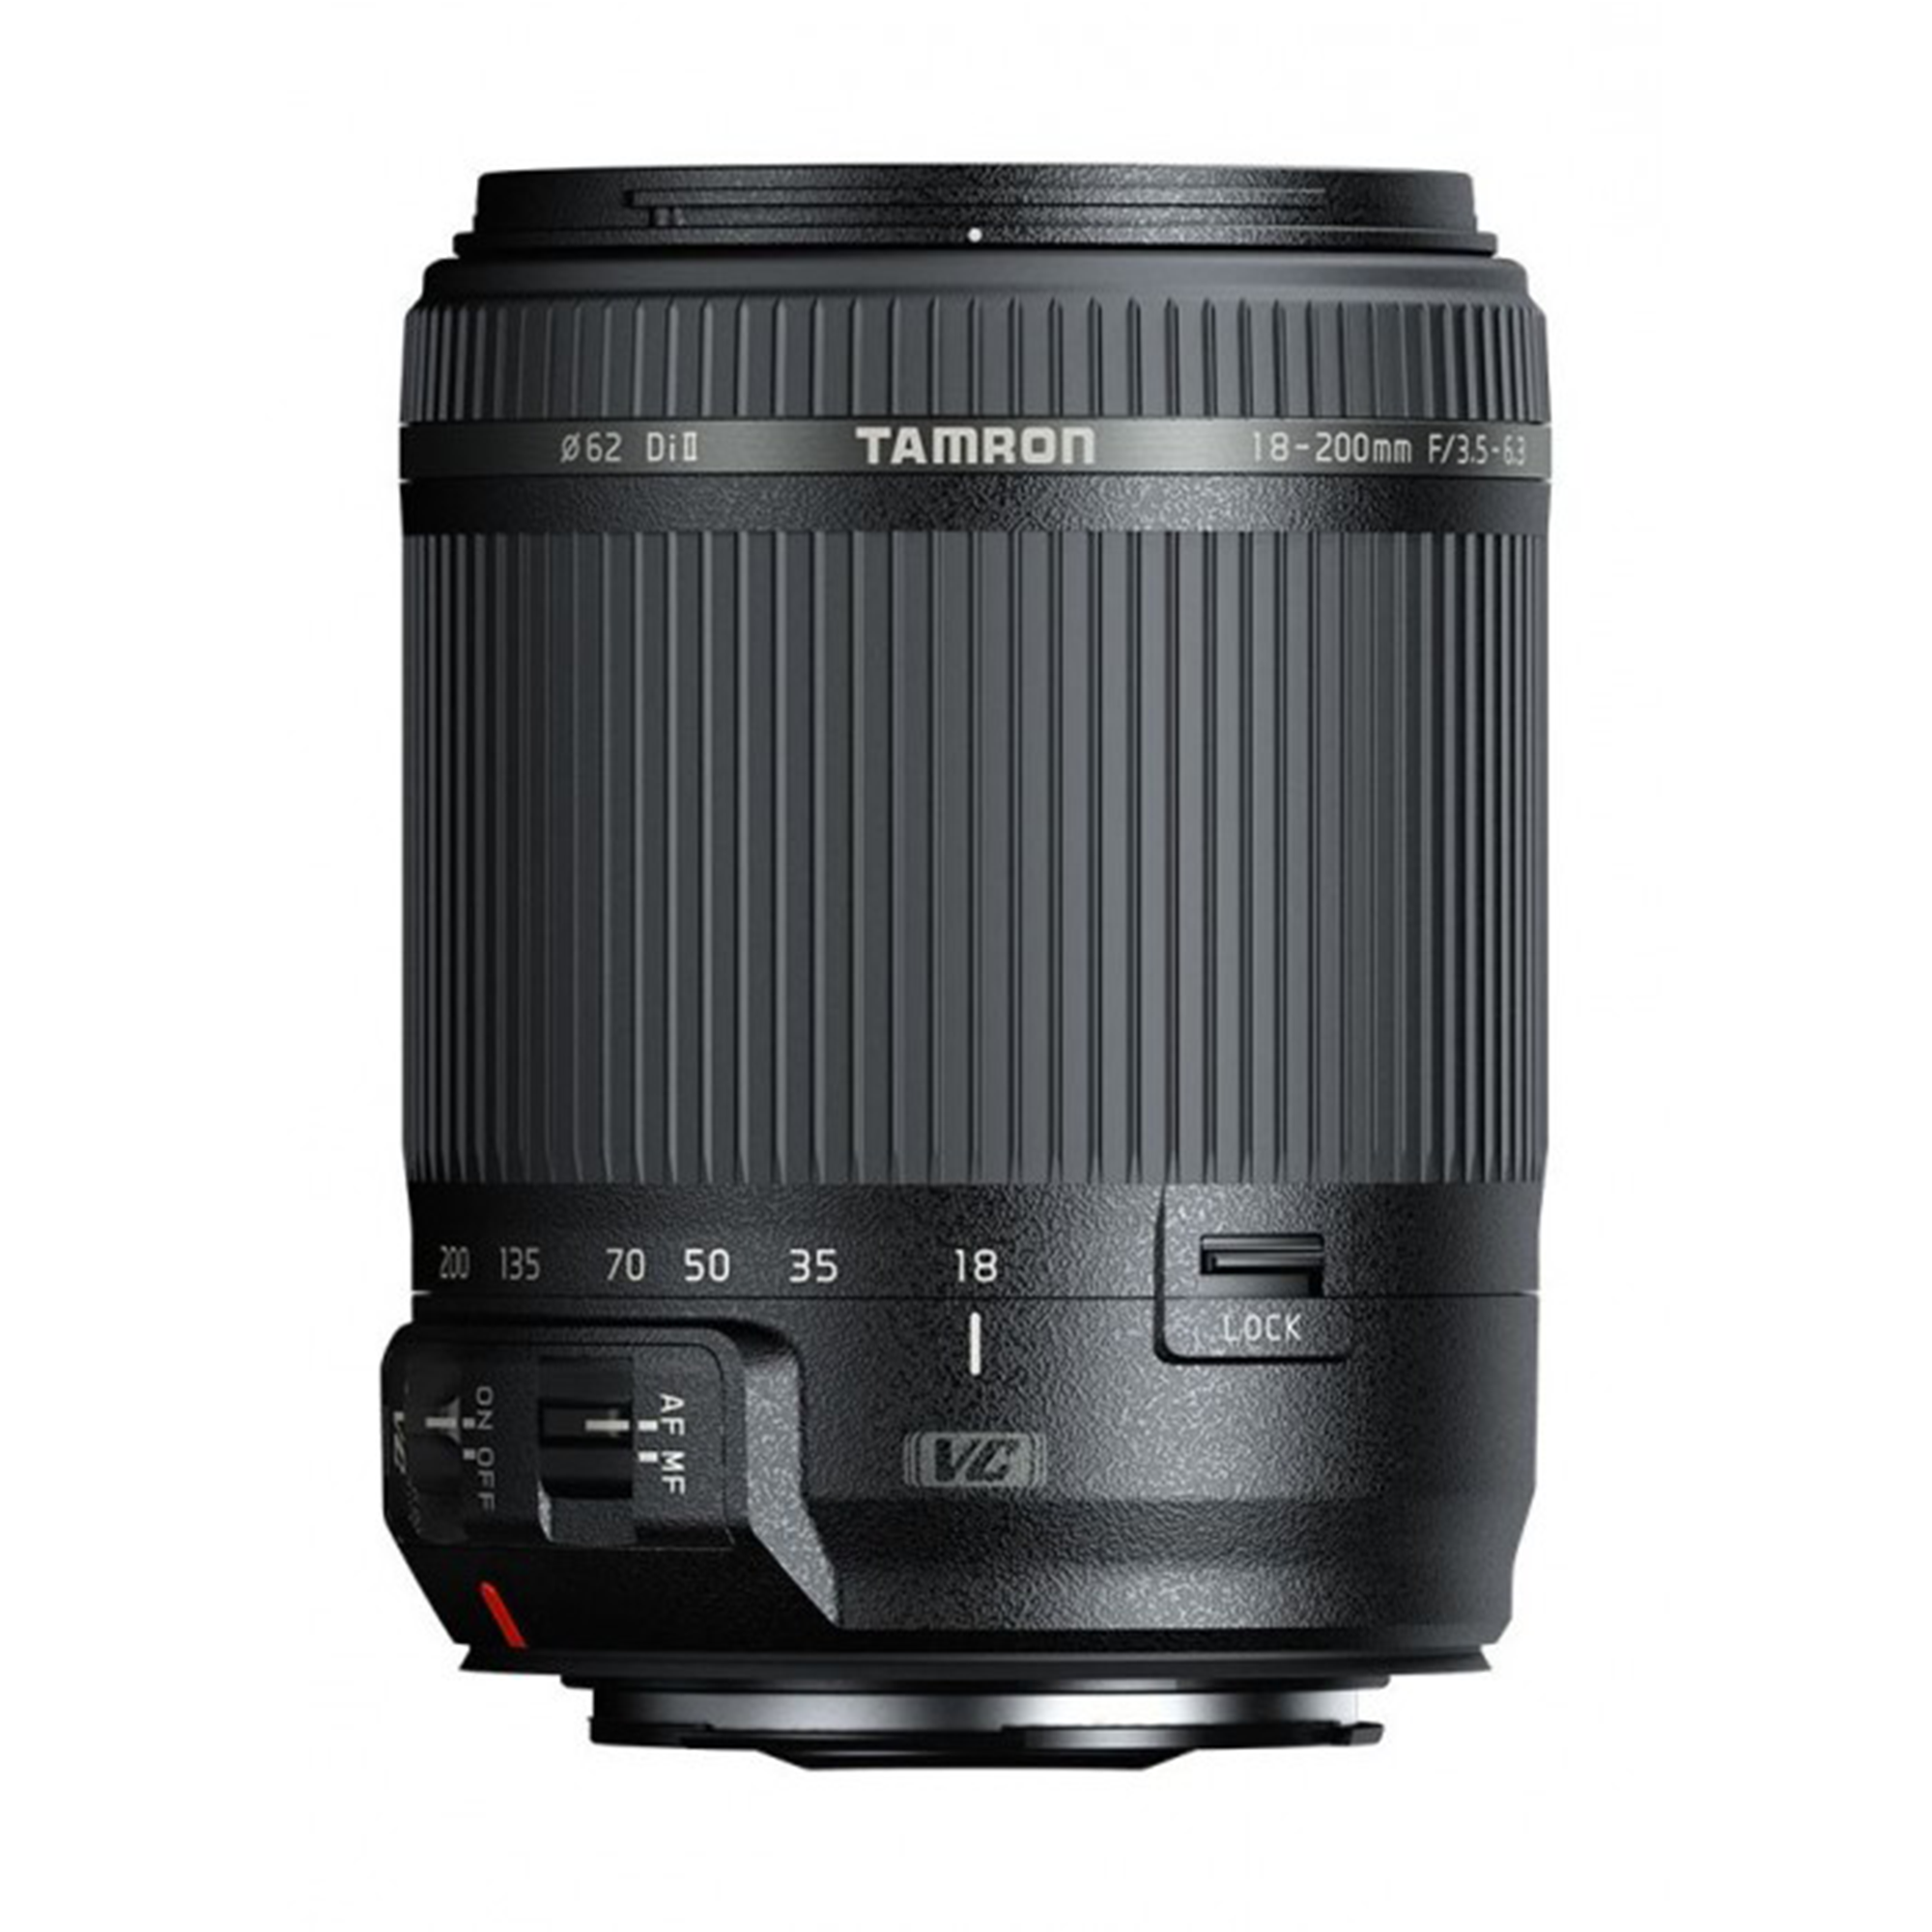 Tamron 18-200mm f/3.5-6.3 Di II VC Lens for canon (غير متوفرحاليا)